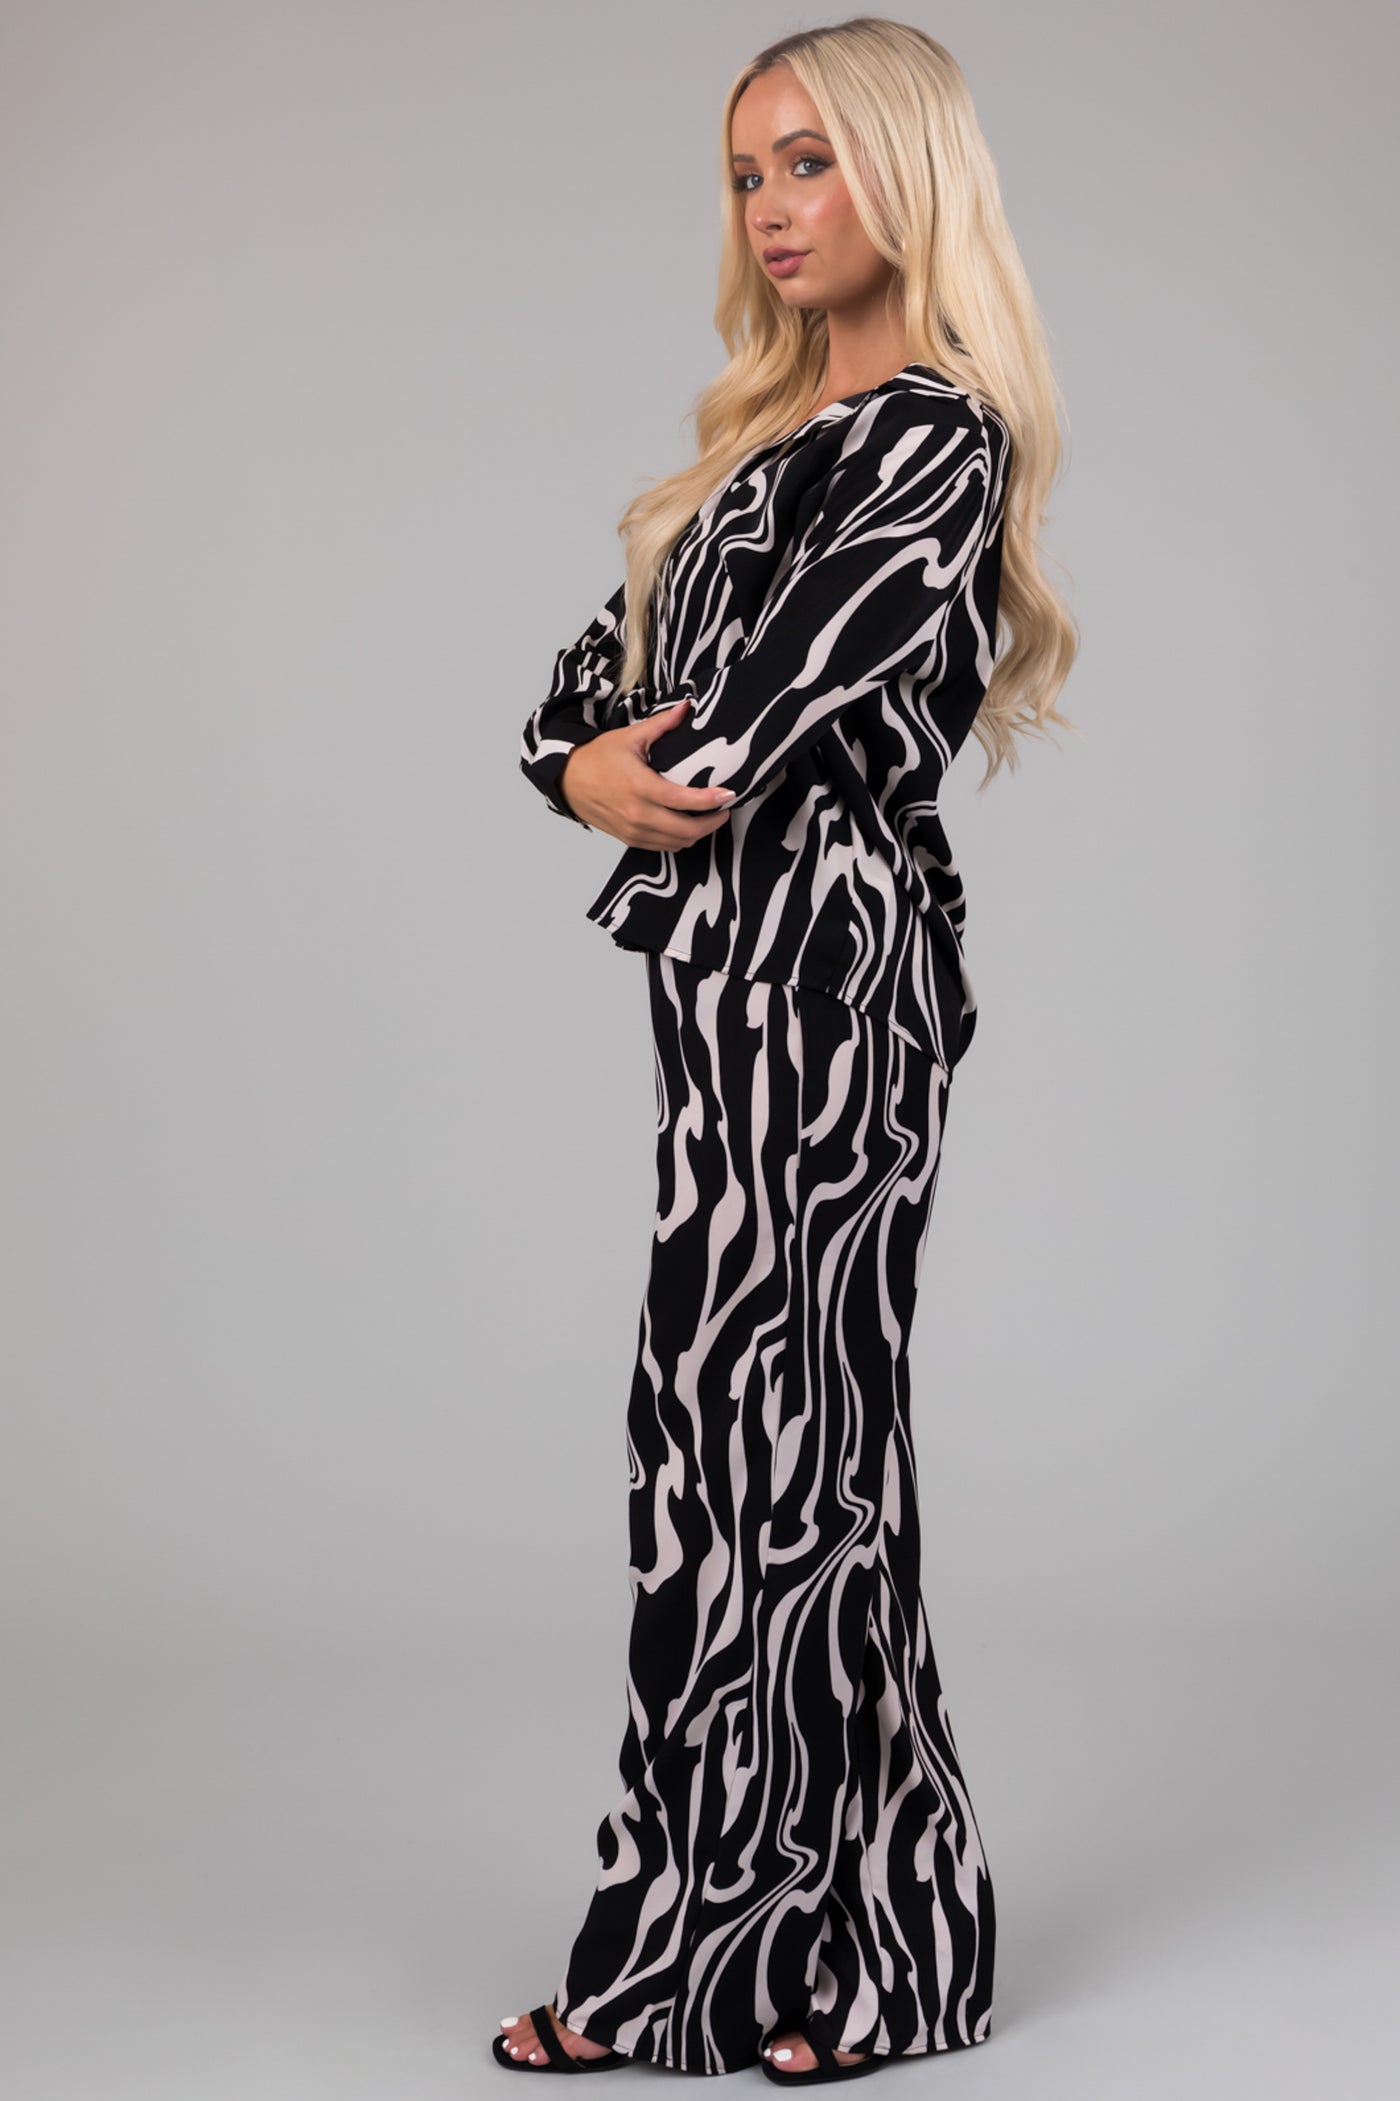 Black and White Abstract Print Top and Pants Set